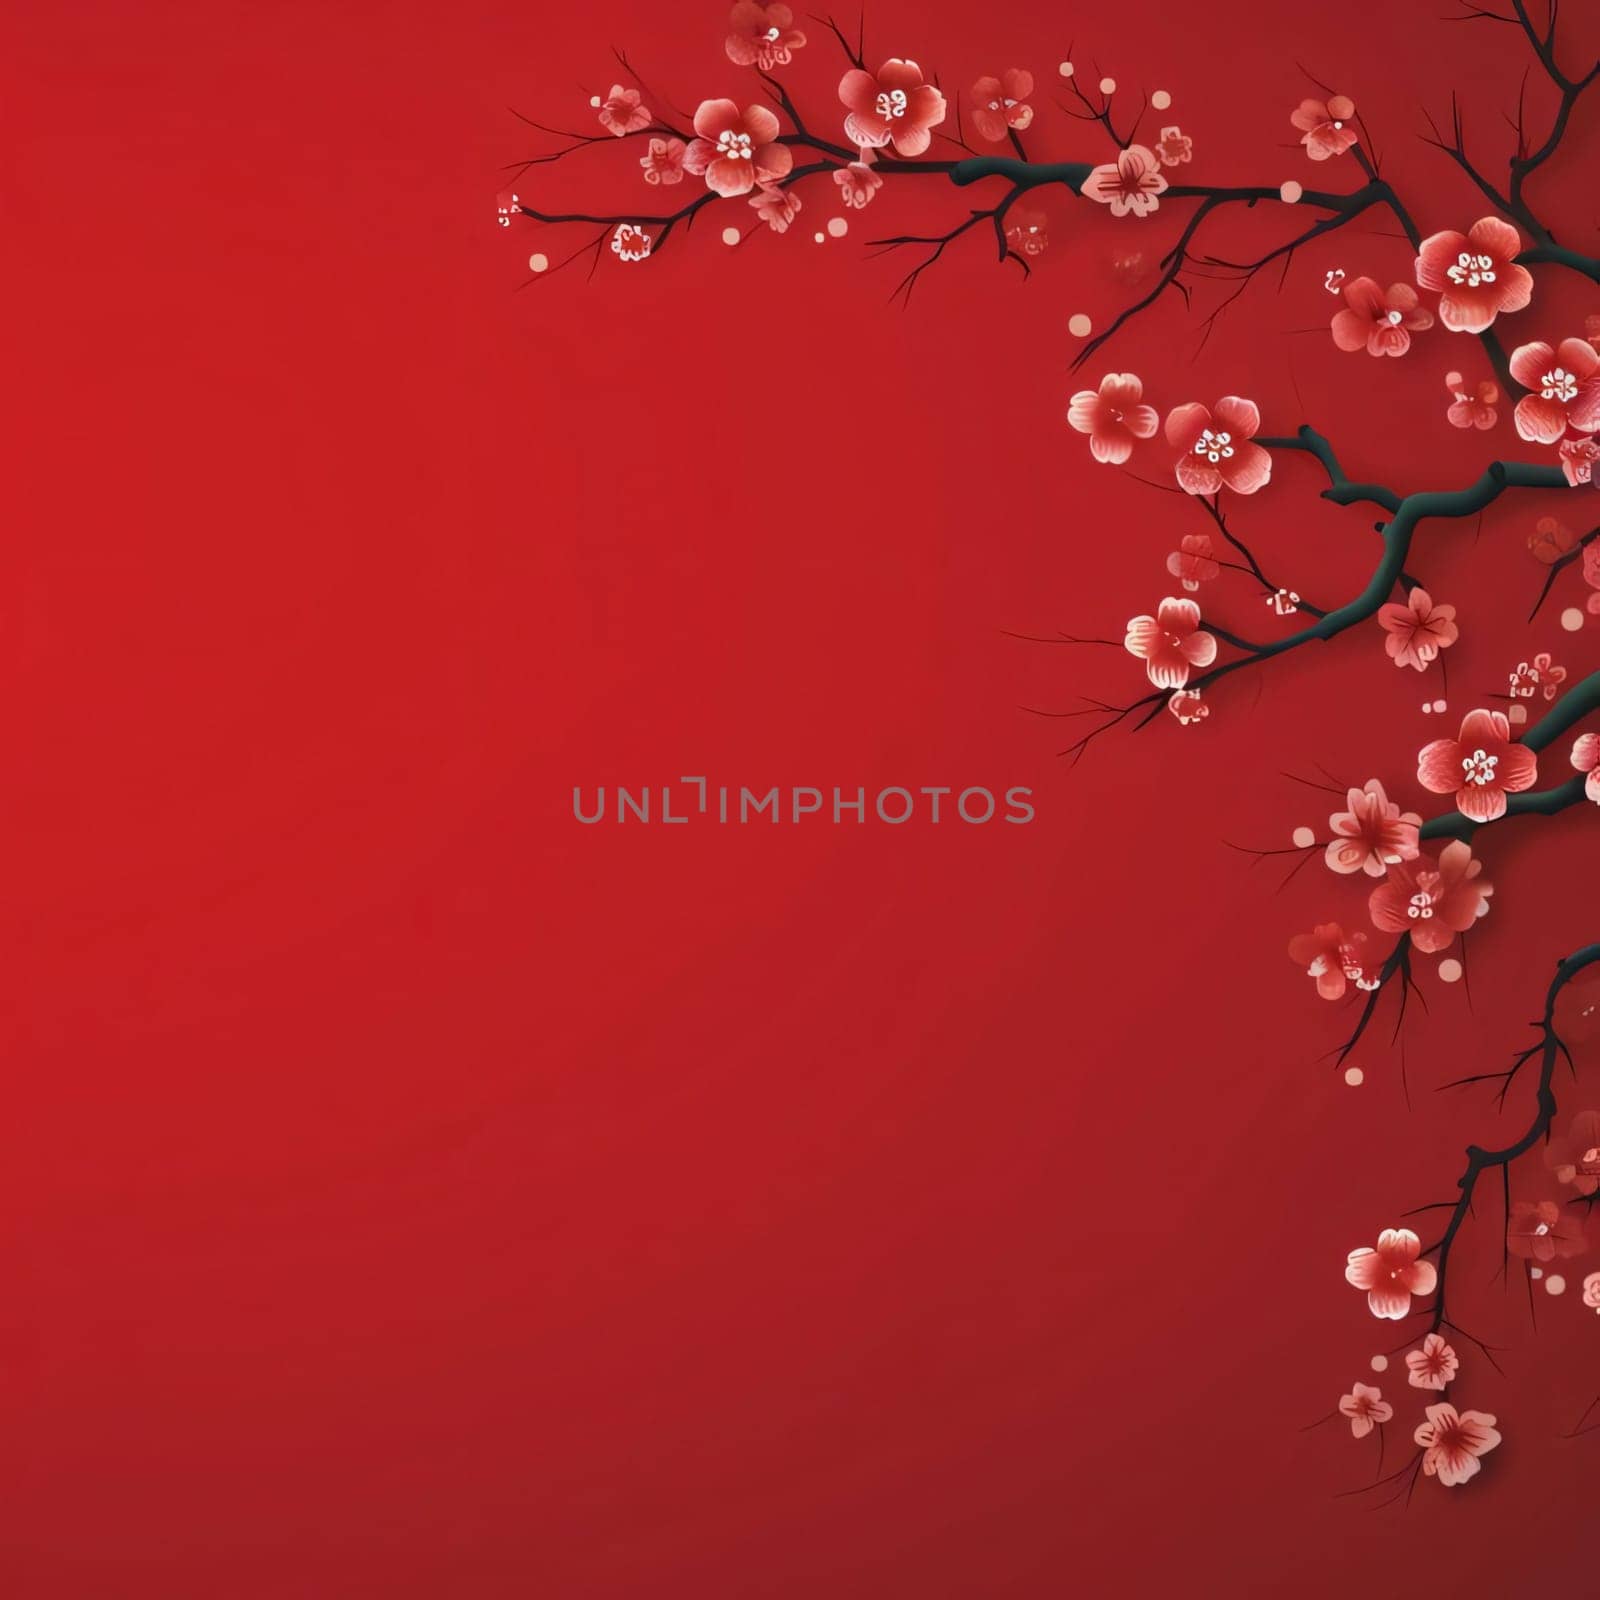 Red background with blossom. Place for your content. Chinese New Year celebrations. A time of celebration and resolutions.